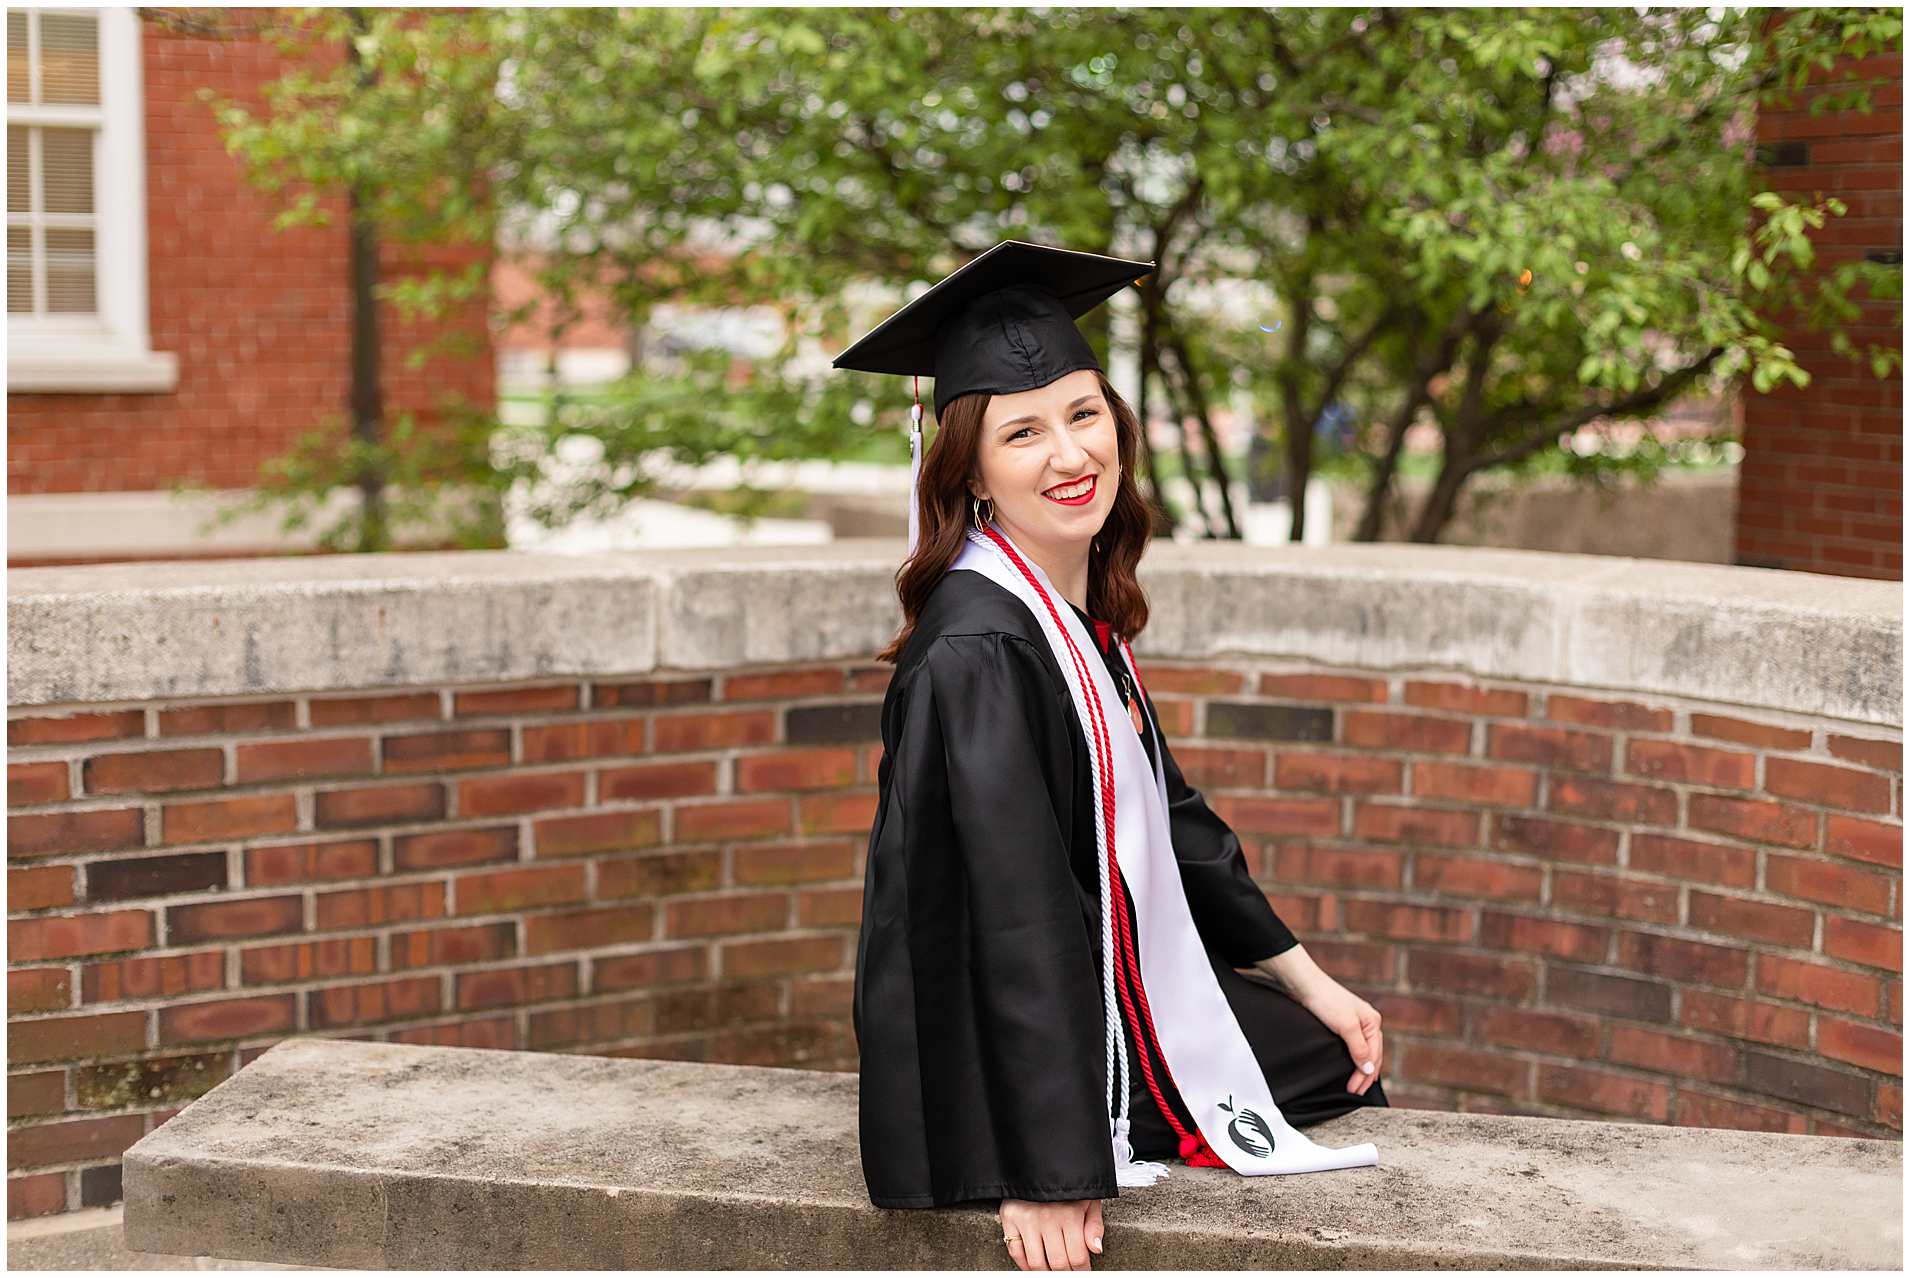 Graduation-Cap and Gown photos at Illinois State University in Normal, IL 